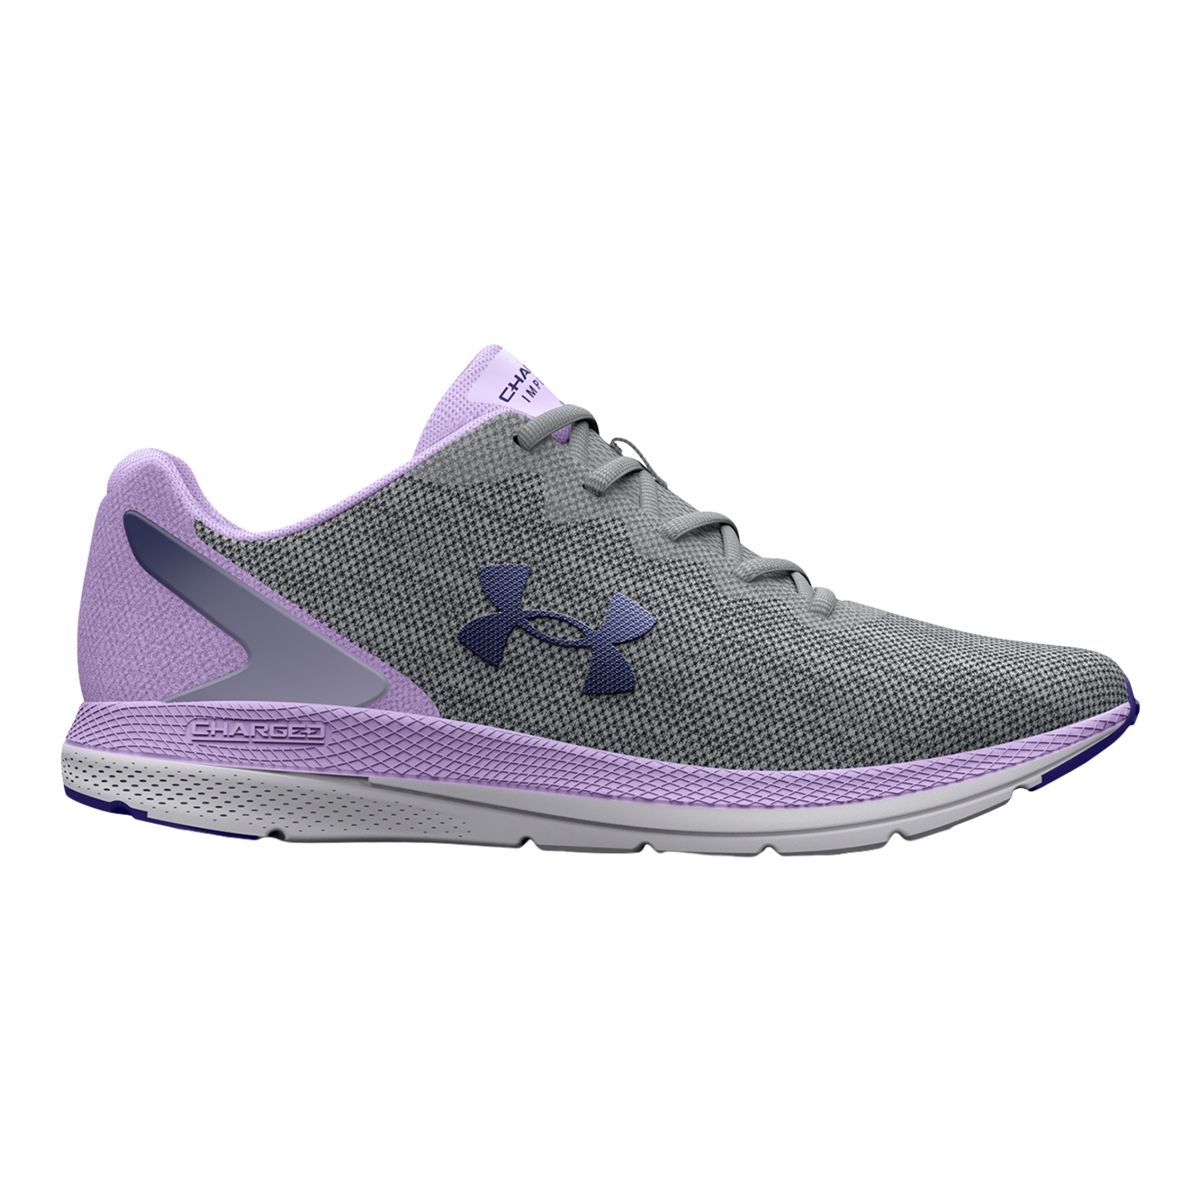 Under Armour Women's Charged Impulse 2 Knit Running Shoes